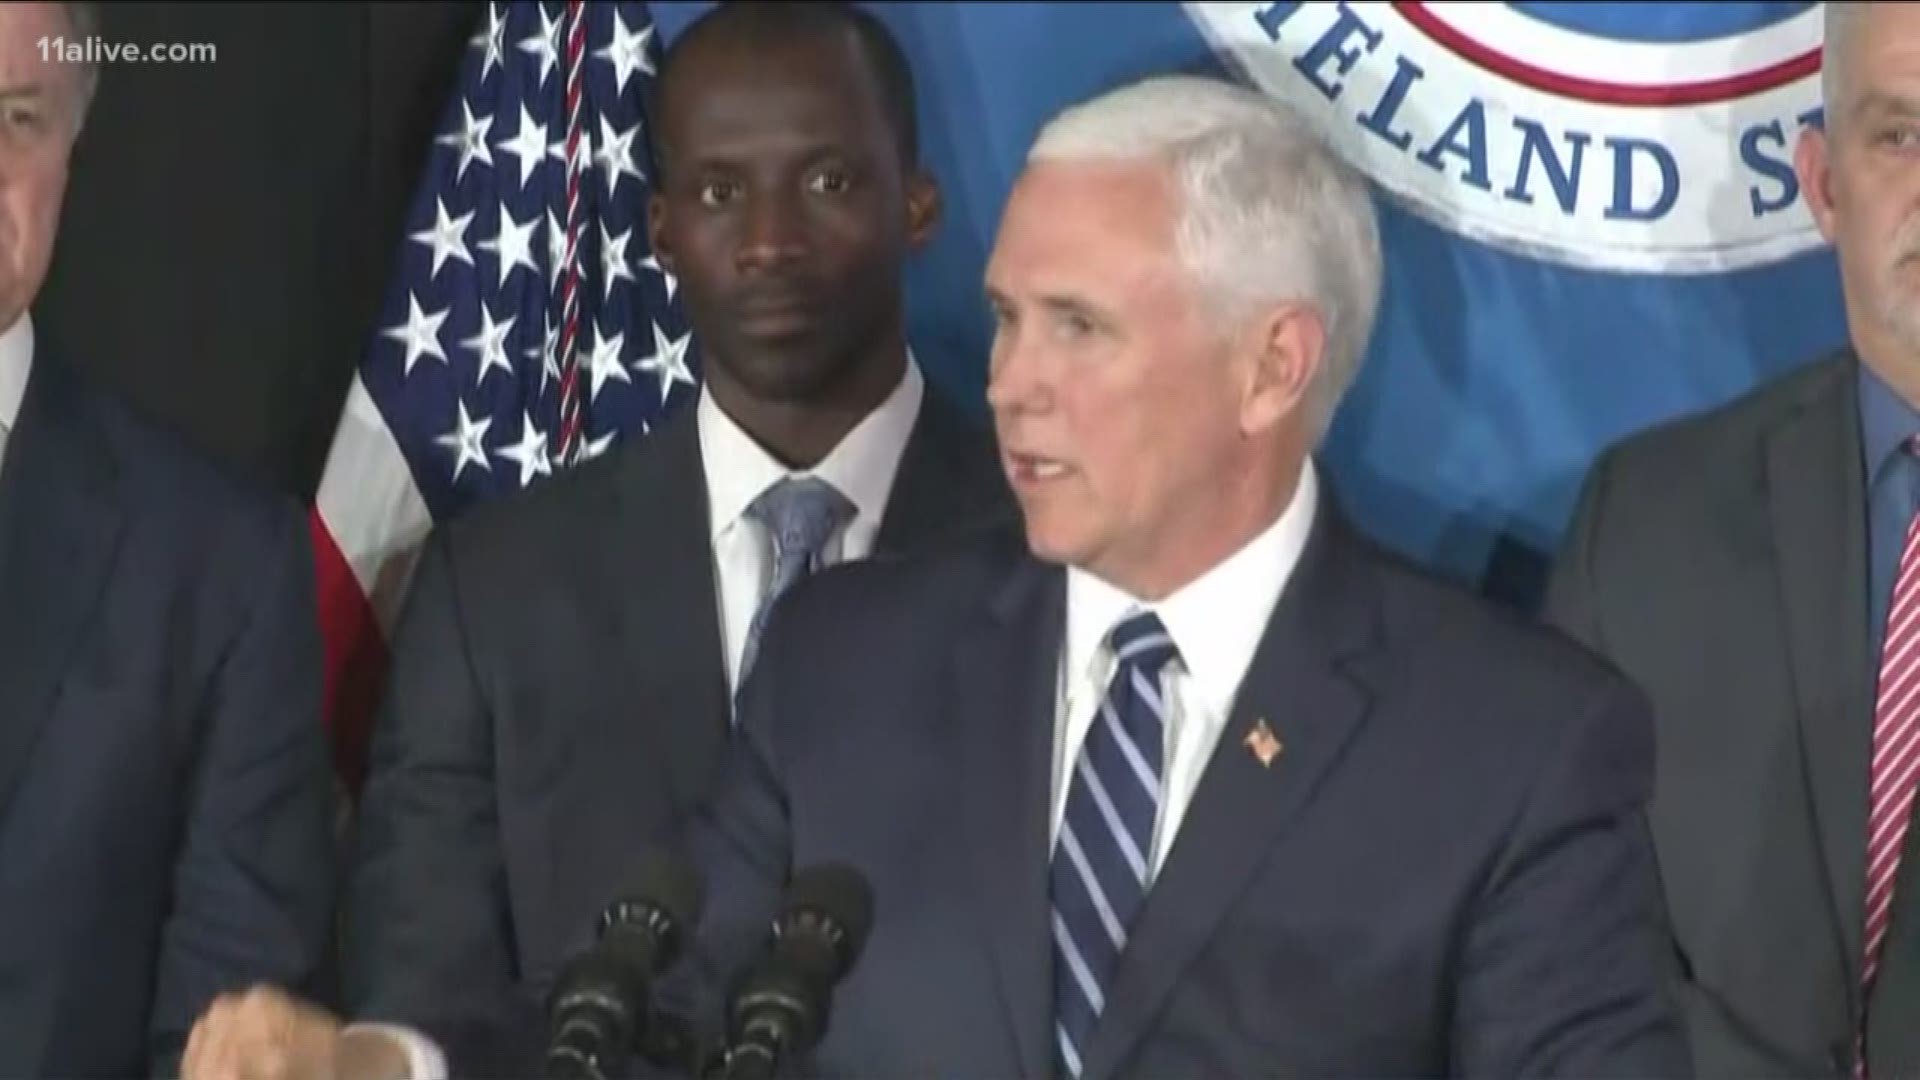 The vice president reiterated the importance of securing the southern border during his visit.